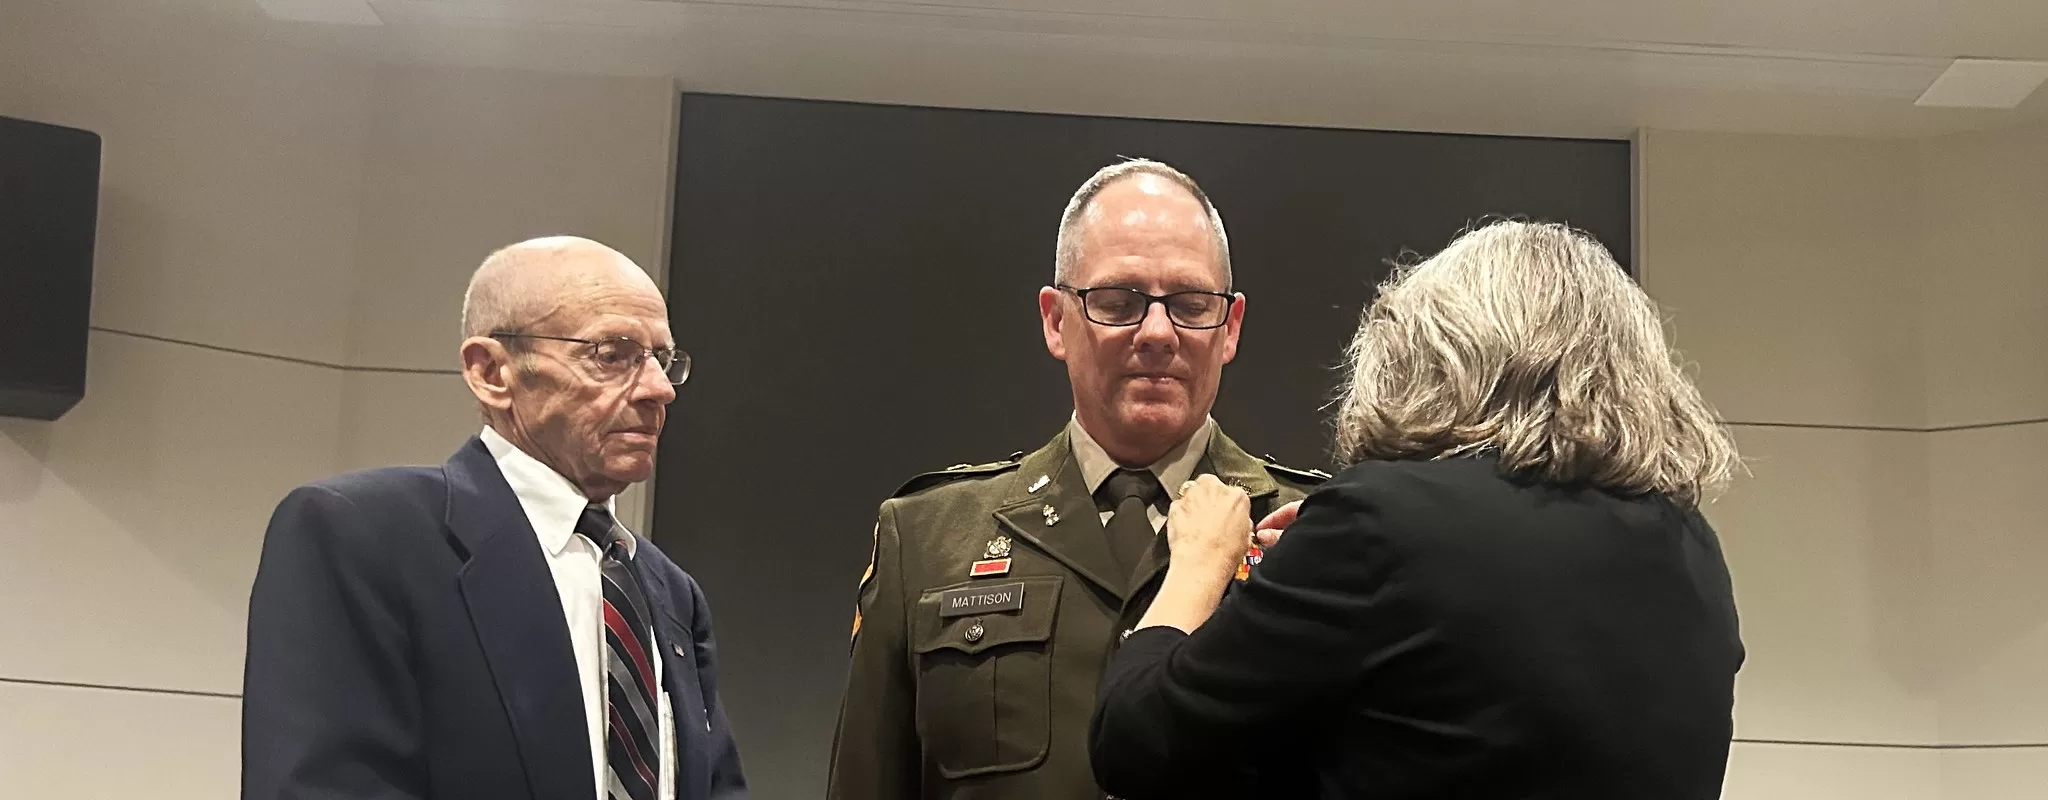 Command Chief Warrant Officer Charles Mattison has chief warrant officer 5 rank pinned on by his father Michael and wife Kathy during a July 12 promotion ceremony at Joint Force Headquarters’ Witmer Hall in Madison, Wis. Wisconsin National Guard photo by Staff Sgt. Alice Ripberger